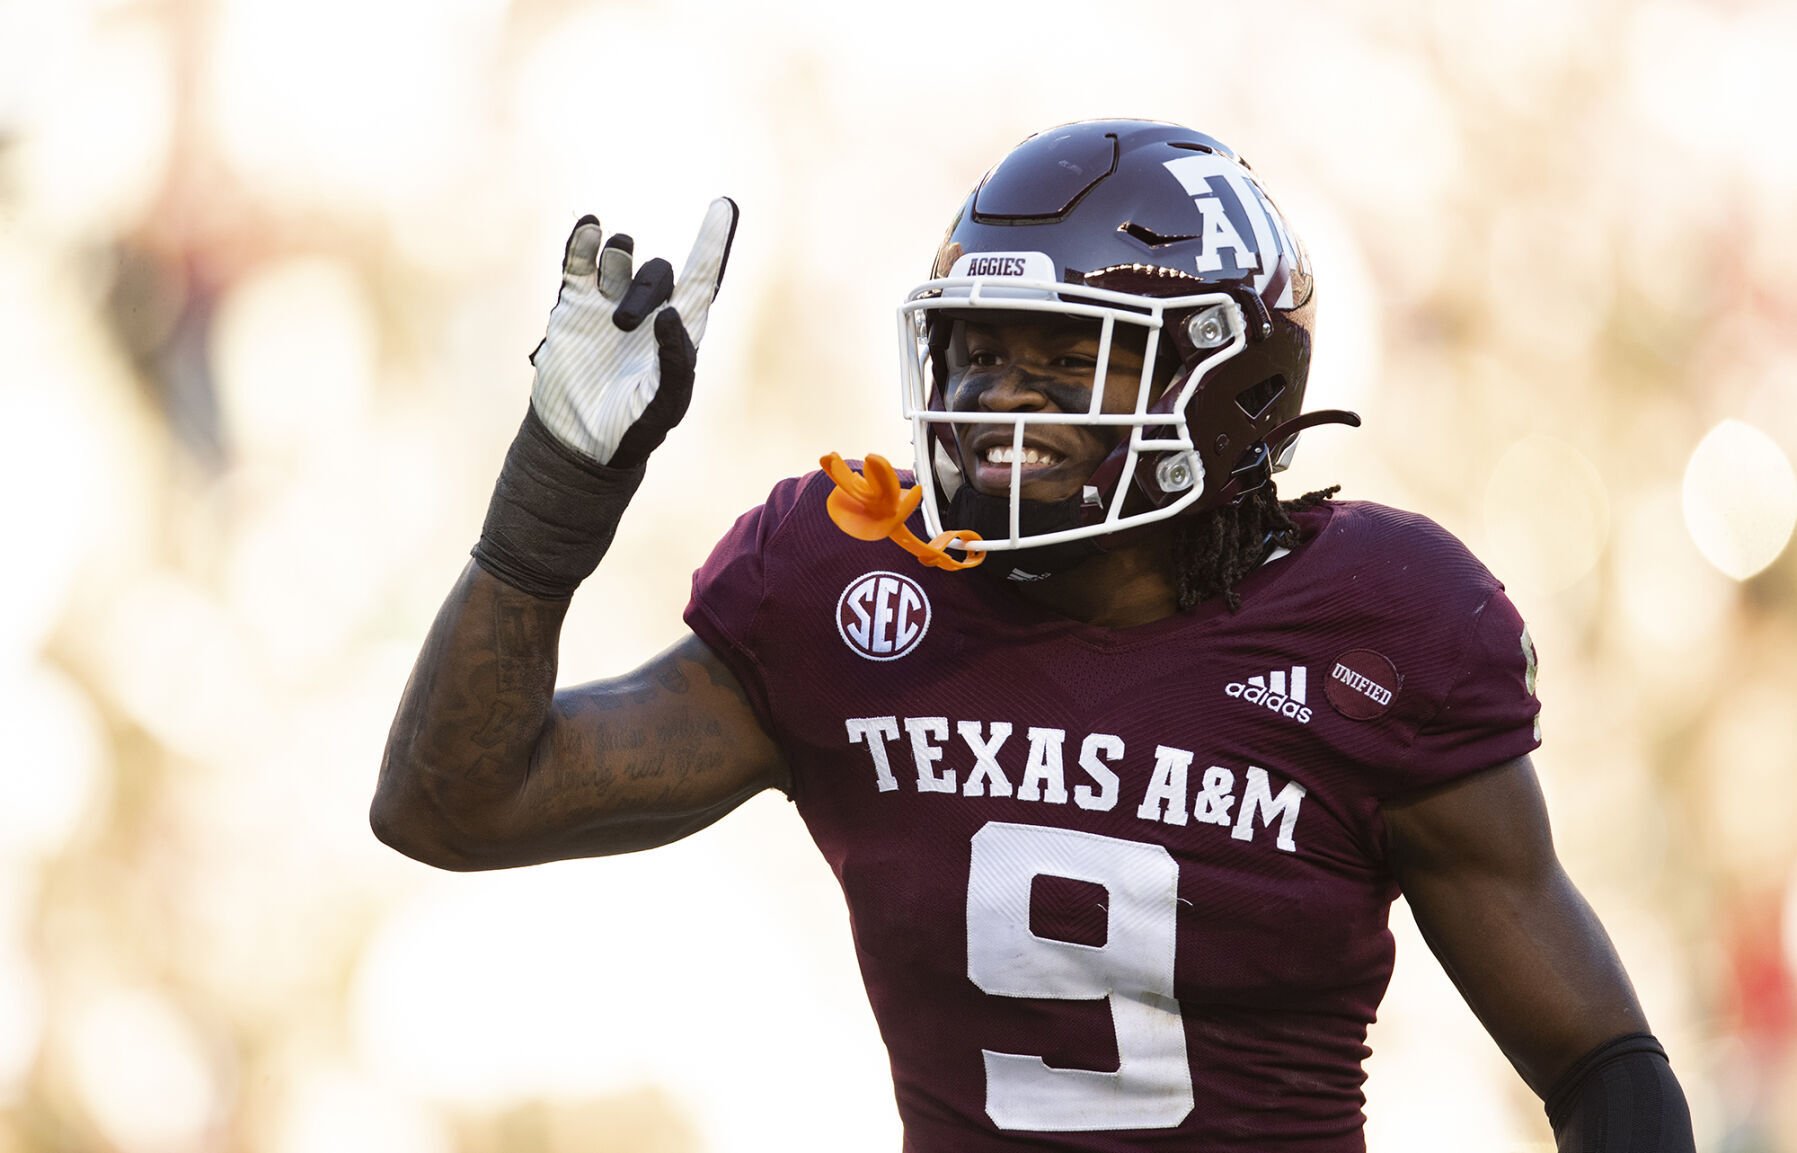 Texas A&M won’t play in Gator Bowl due to Covid-19 issues 6